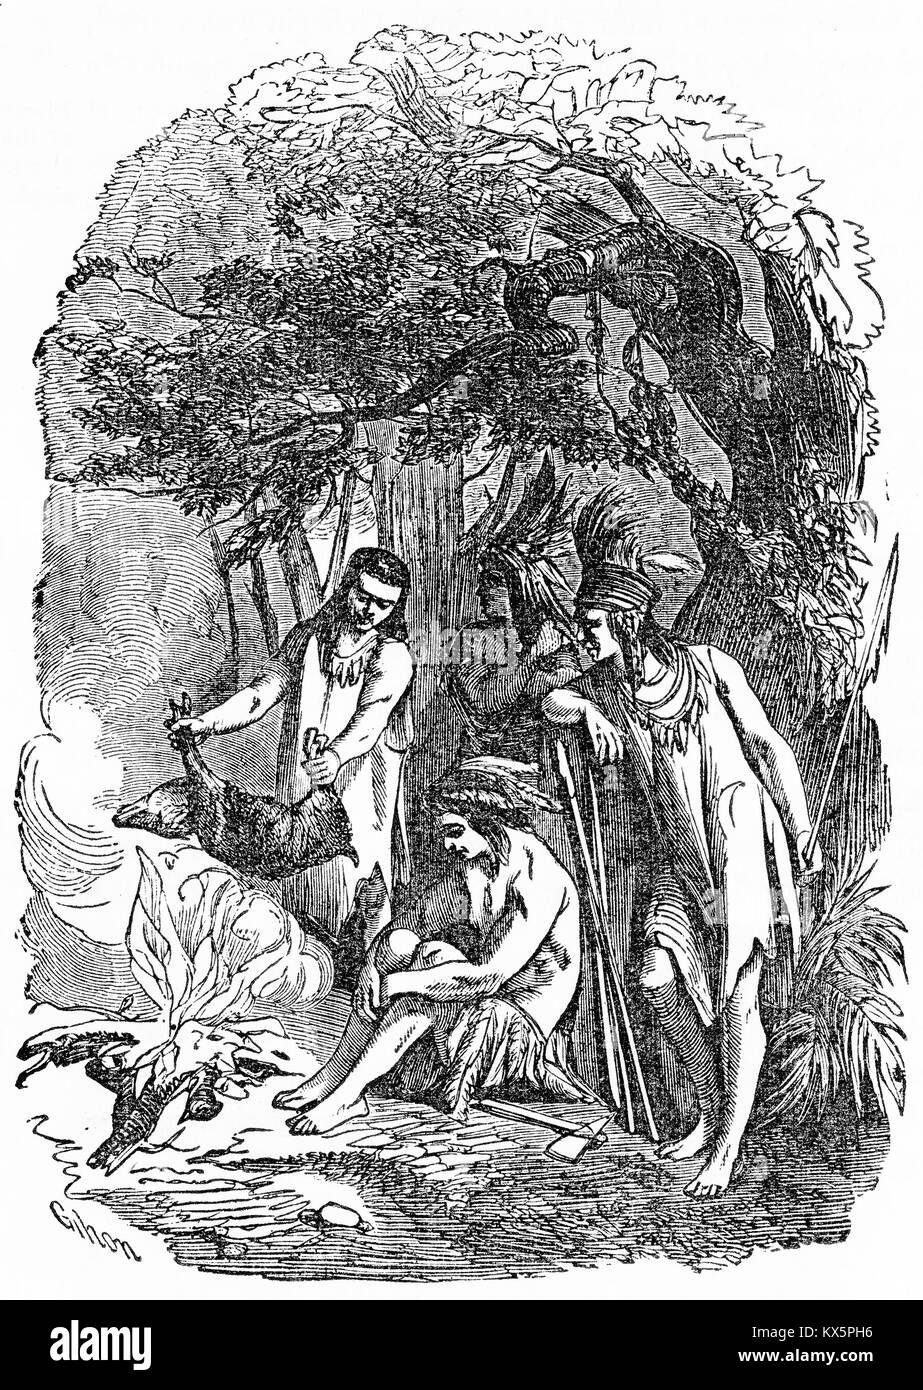 Engraving of native Americans cooking a meal, supposedly in the days before Europeans arrived. From A New History of the USA, by John Lord, 1859. Stock Photo